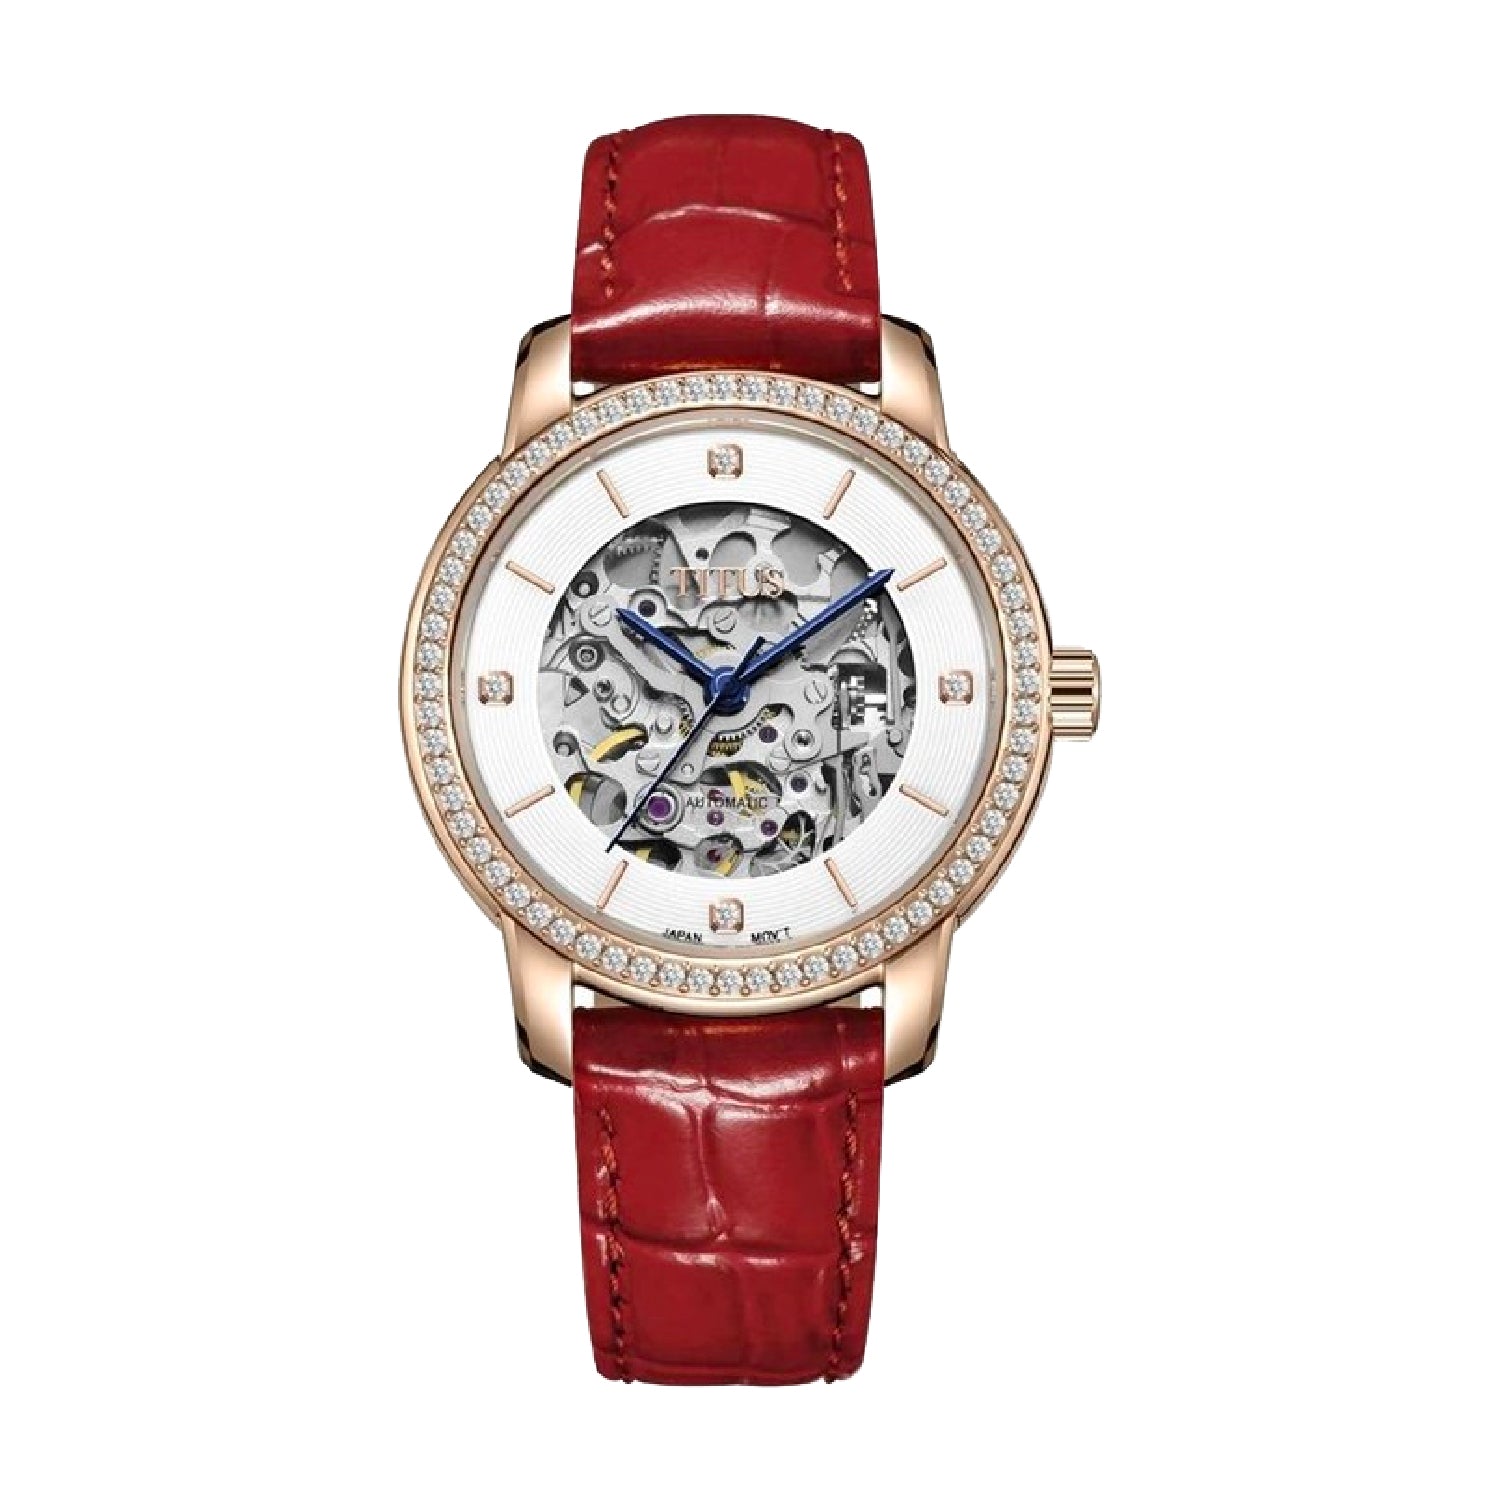 Exquisite 3 Hands Mechanical Leather Women Watch W06-03232-003